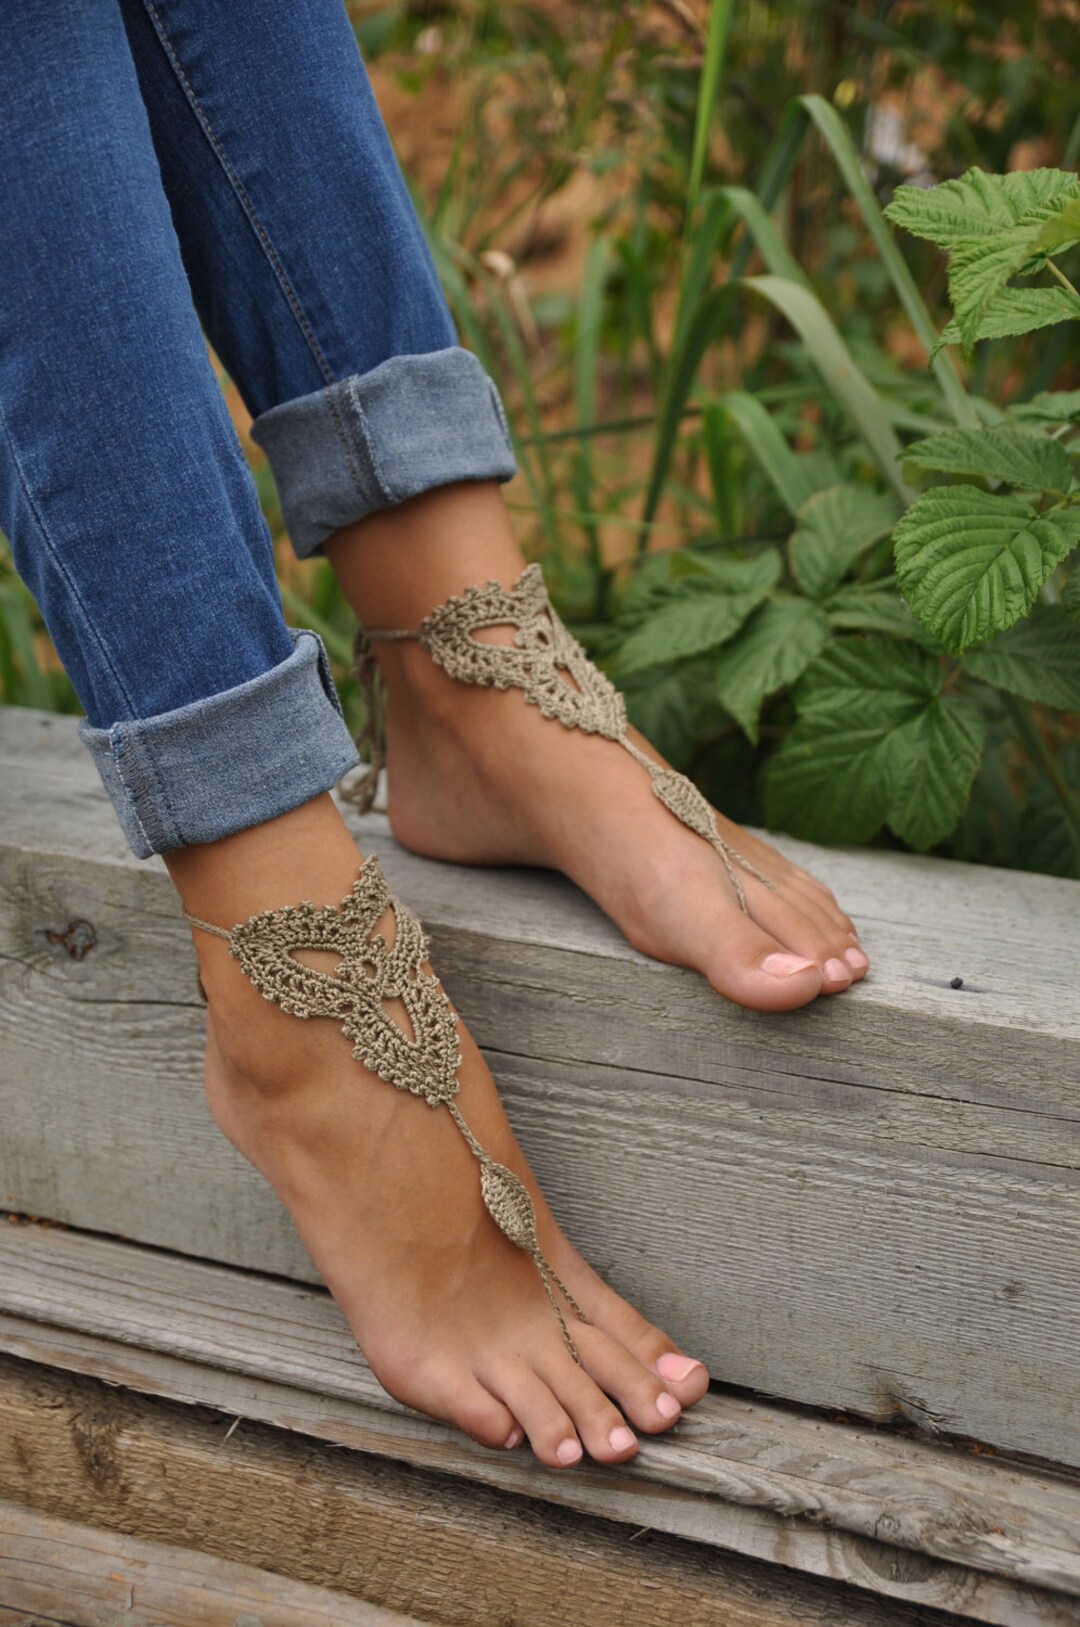 Crochet Tan Barefoot Sandals Taupe Nude Shoes Foot Jewelry photo